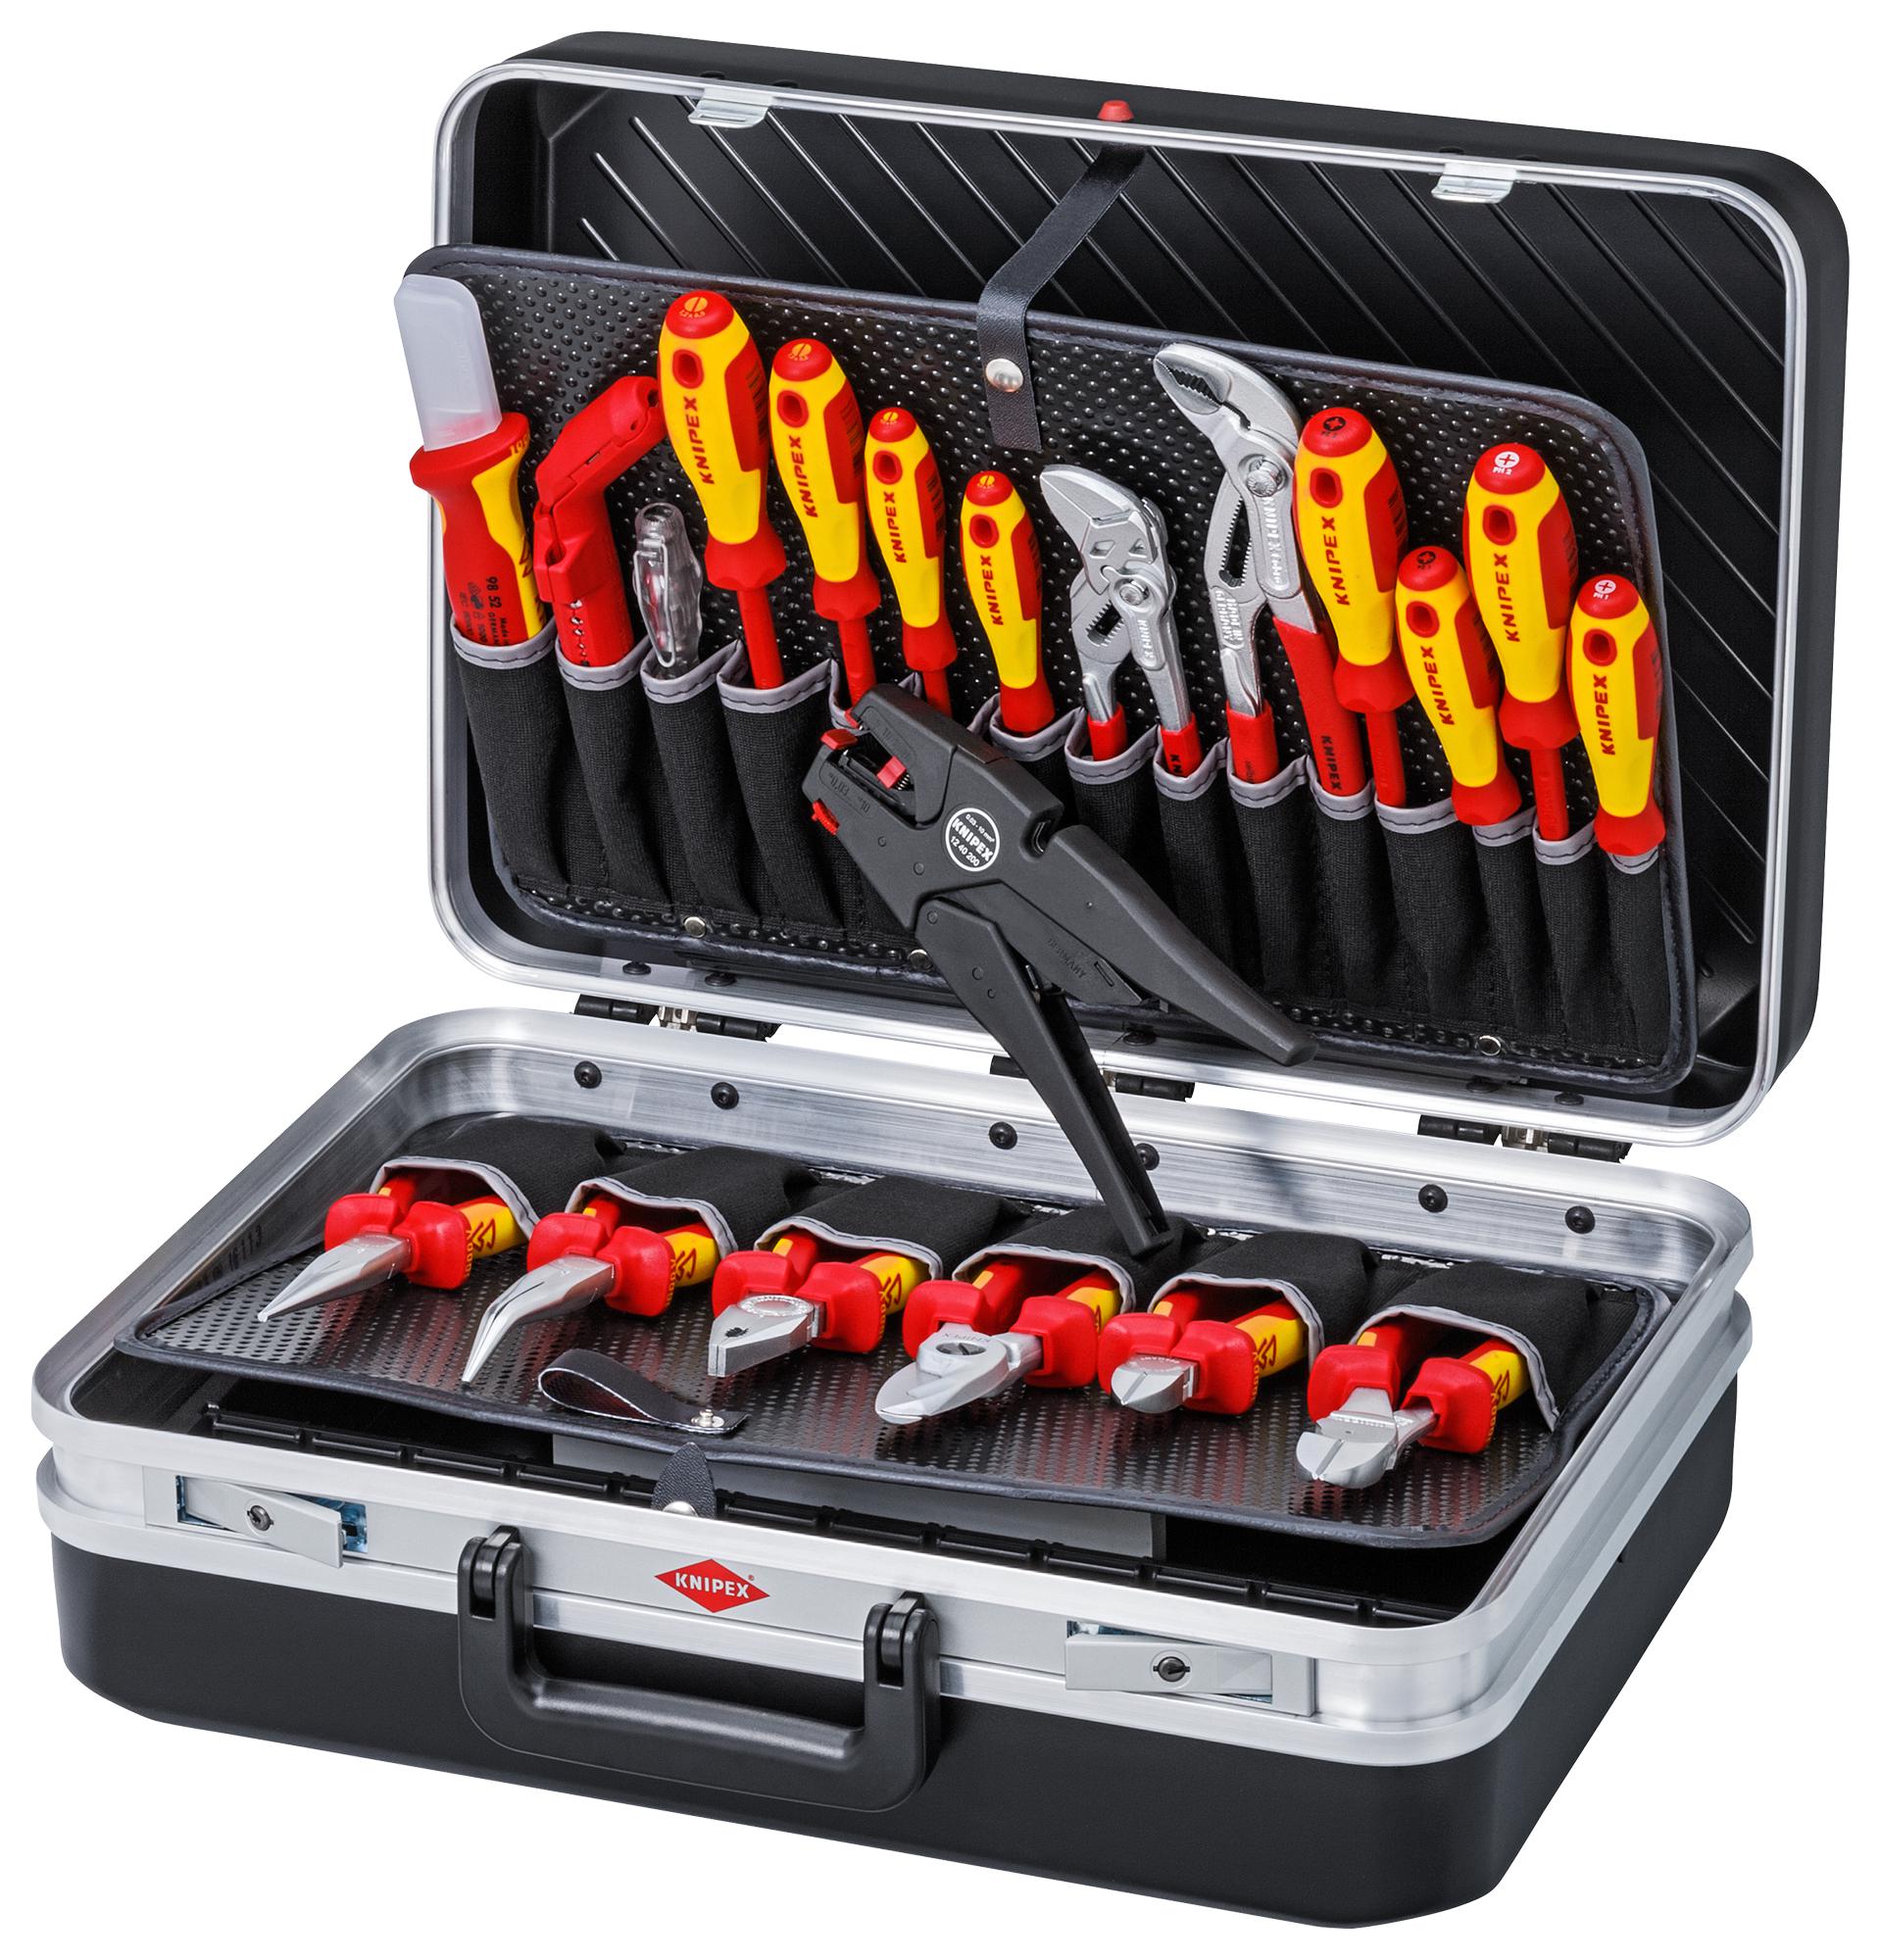 00 21 20 ELECTRICAL TOOL KIT, 20 PC KNIPEX